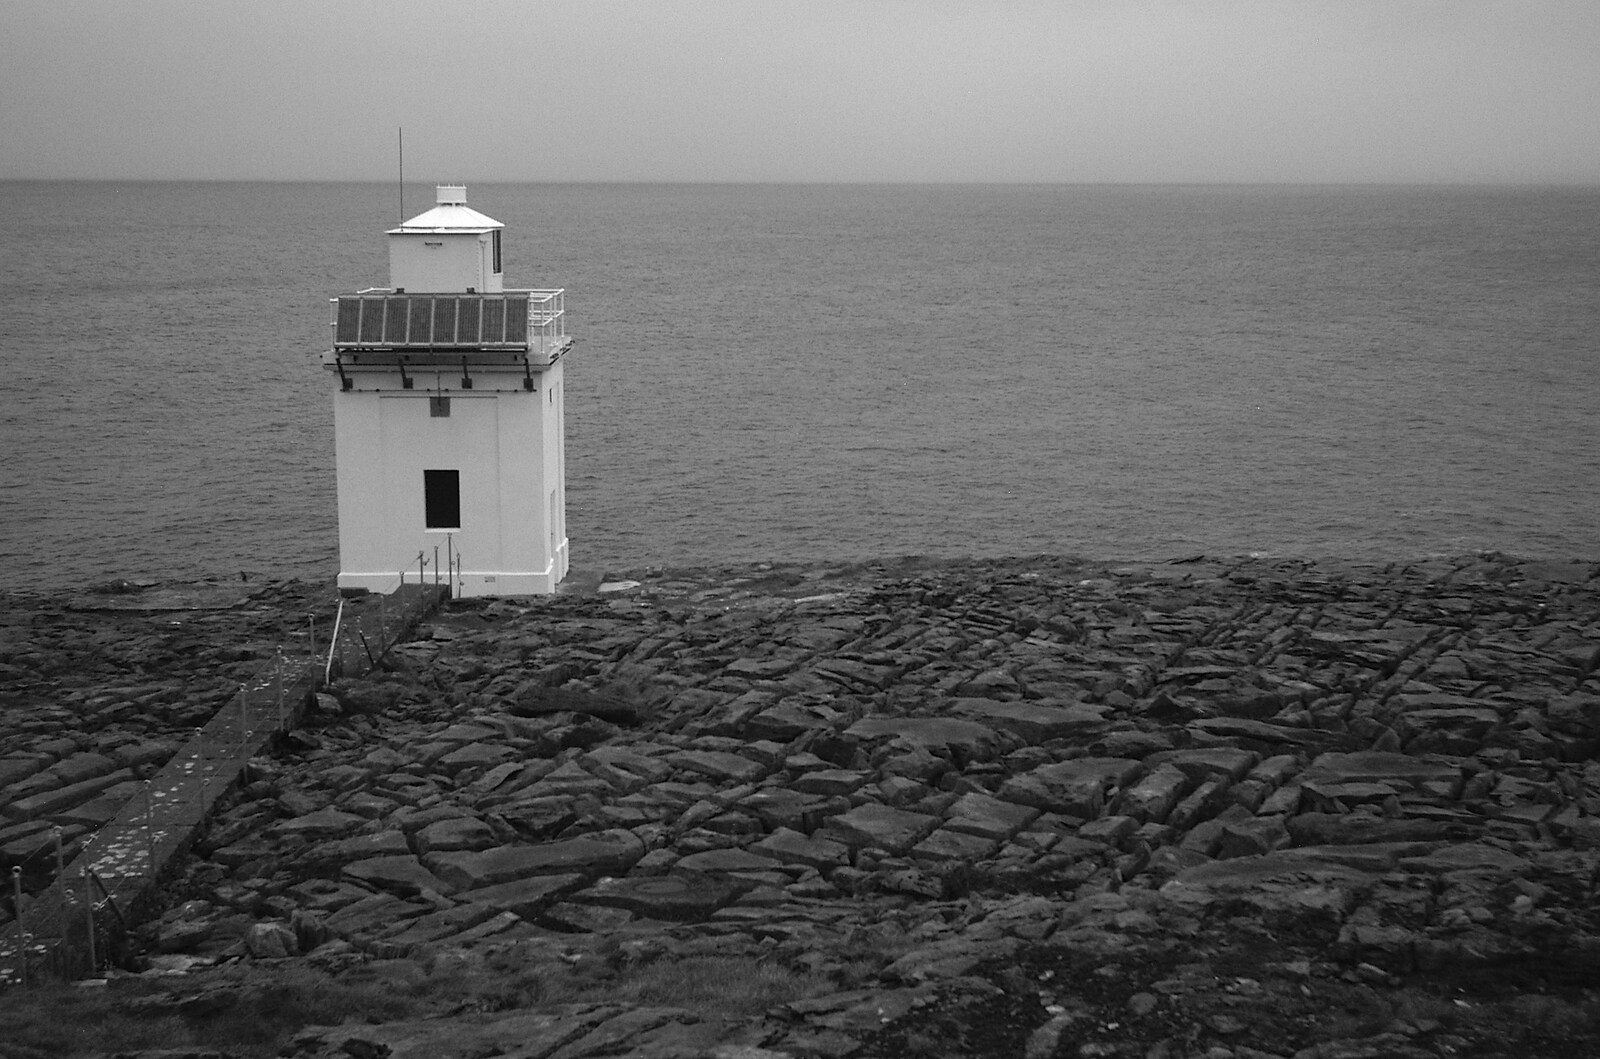 Along the coast road, there's a small lighthouse from Corofin, Ennistymon and The Burran, County Clare, Western Ireland - 27th October 2006